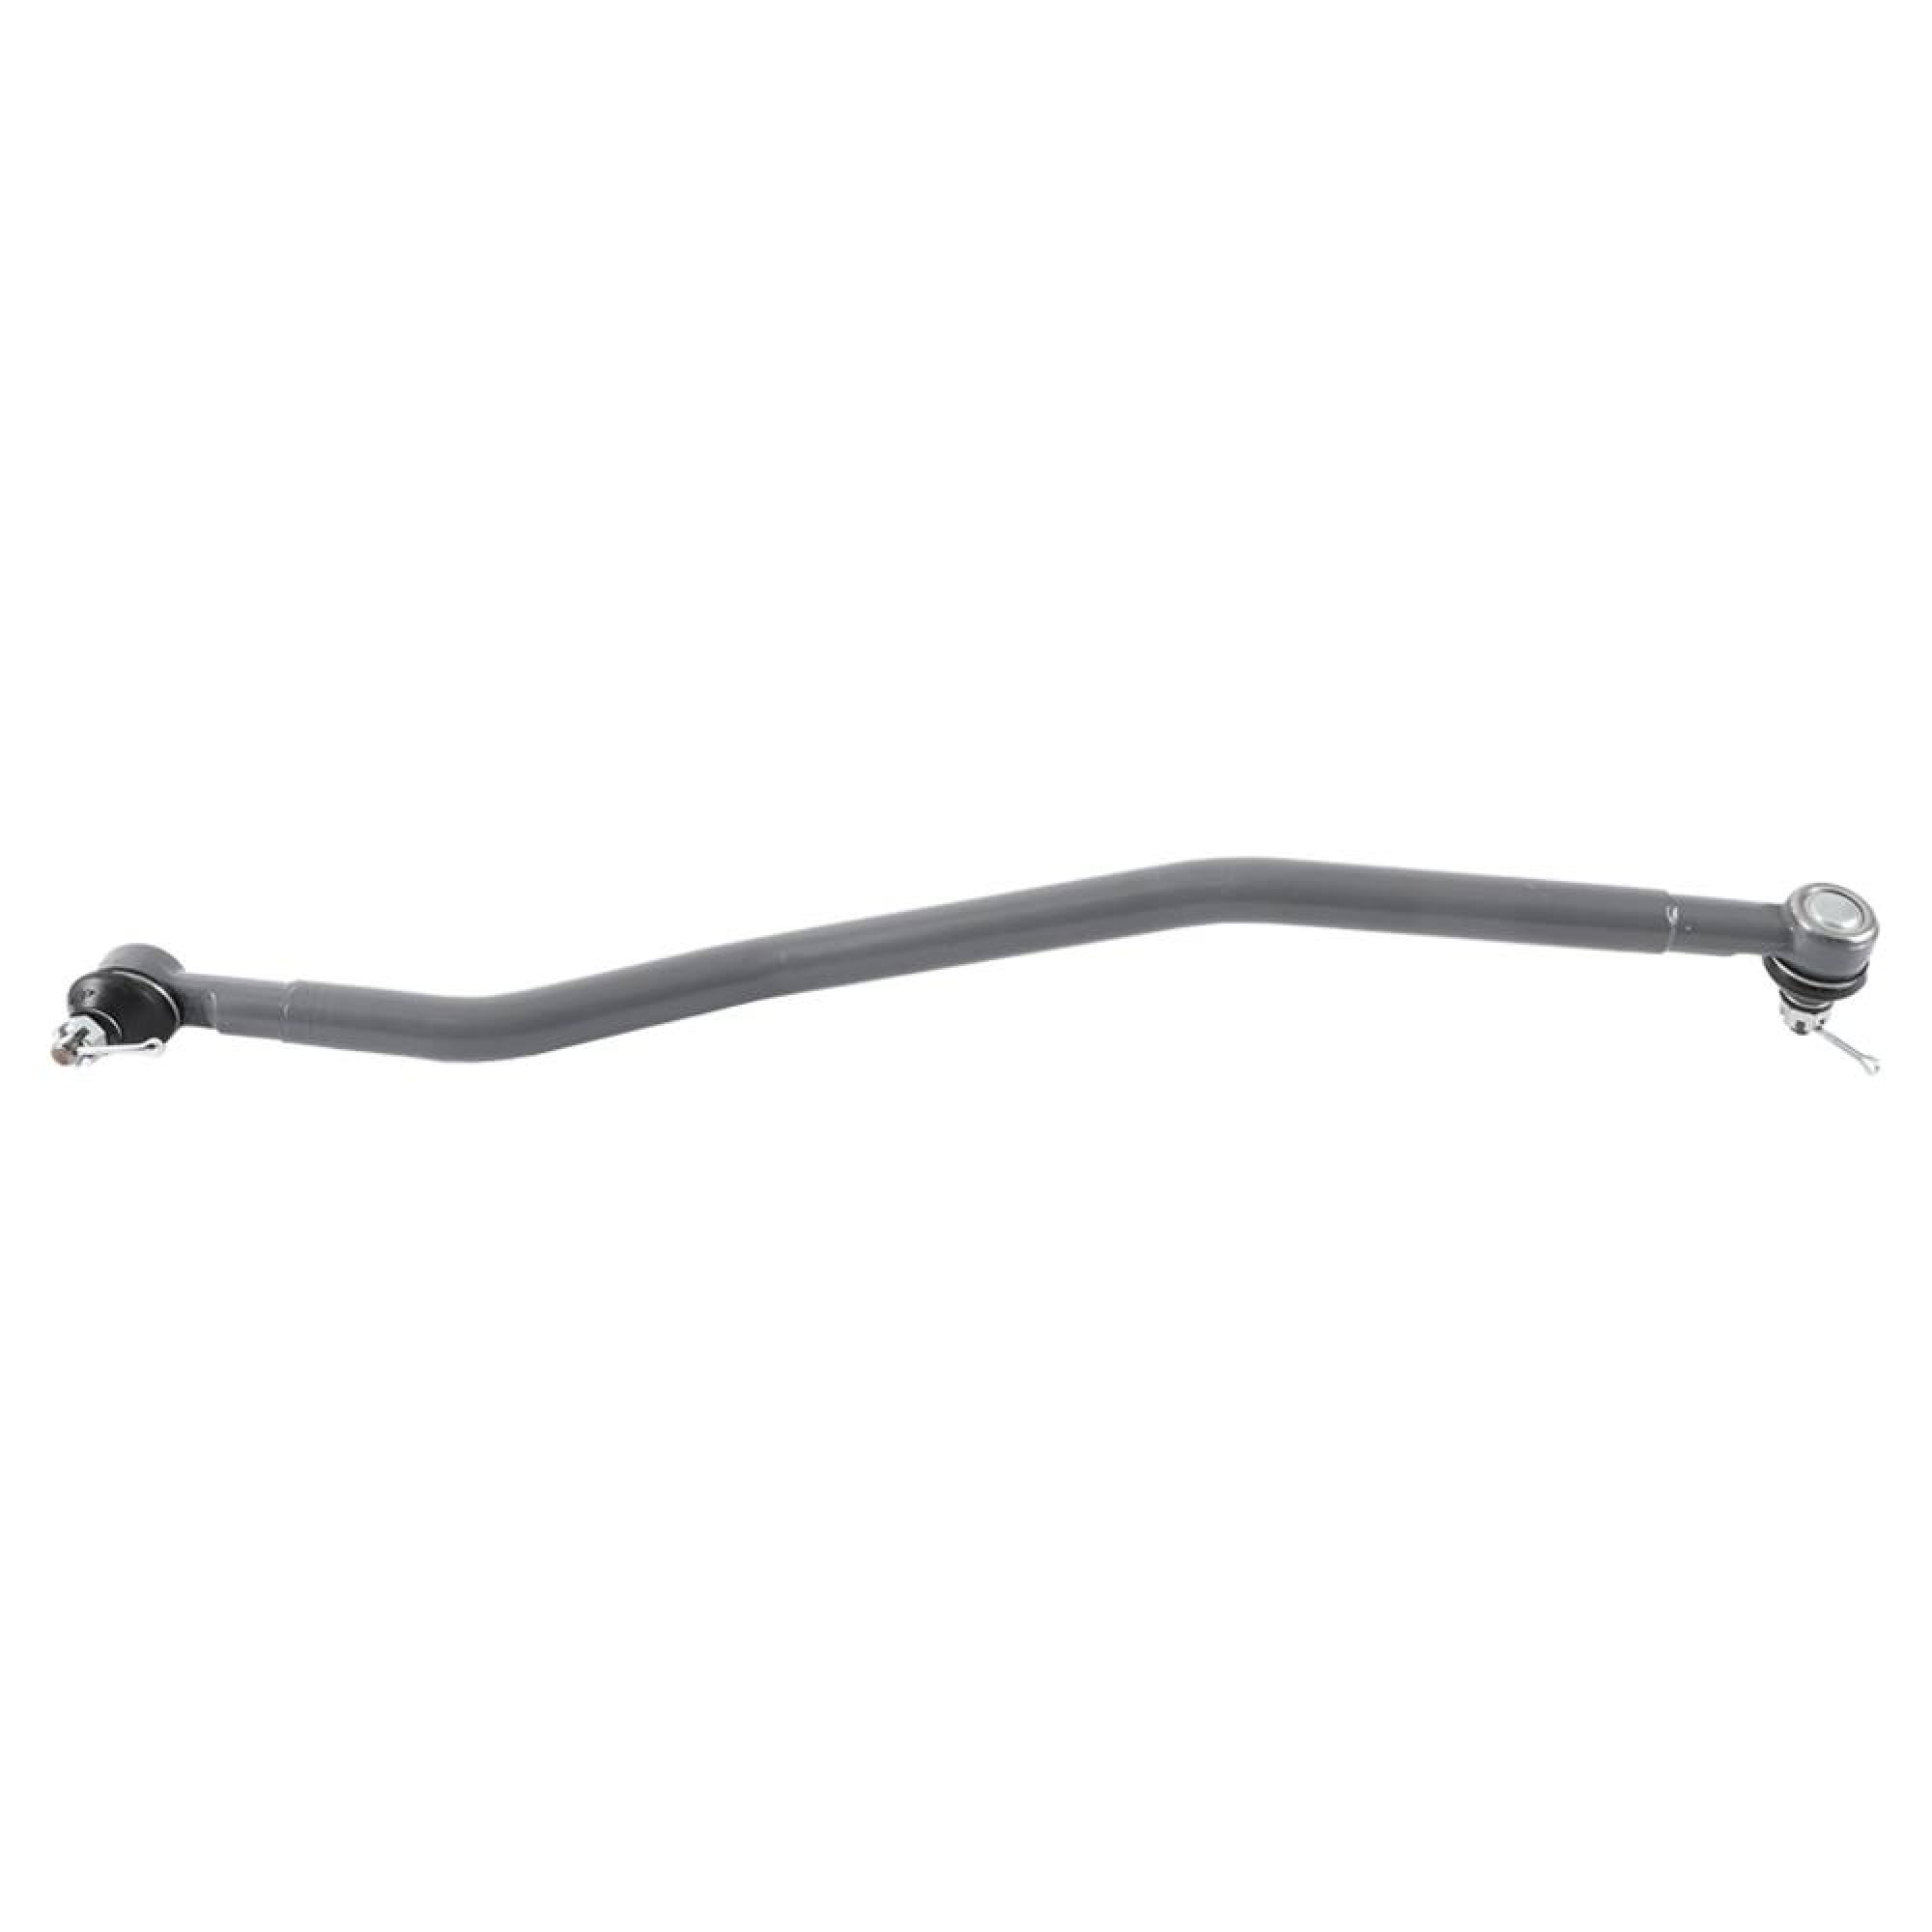 Complete Tractor New 1904-0105 Tie Rod Replacement for Kubota B2920HSD B7400HSD B7410D B7500D B7500DTN B7500HSD B7510D B7510DN B7510HSD B7510HSDTR B7610HSD 6C140-57710 6C140-57712 6C300-57760